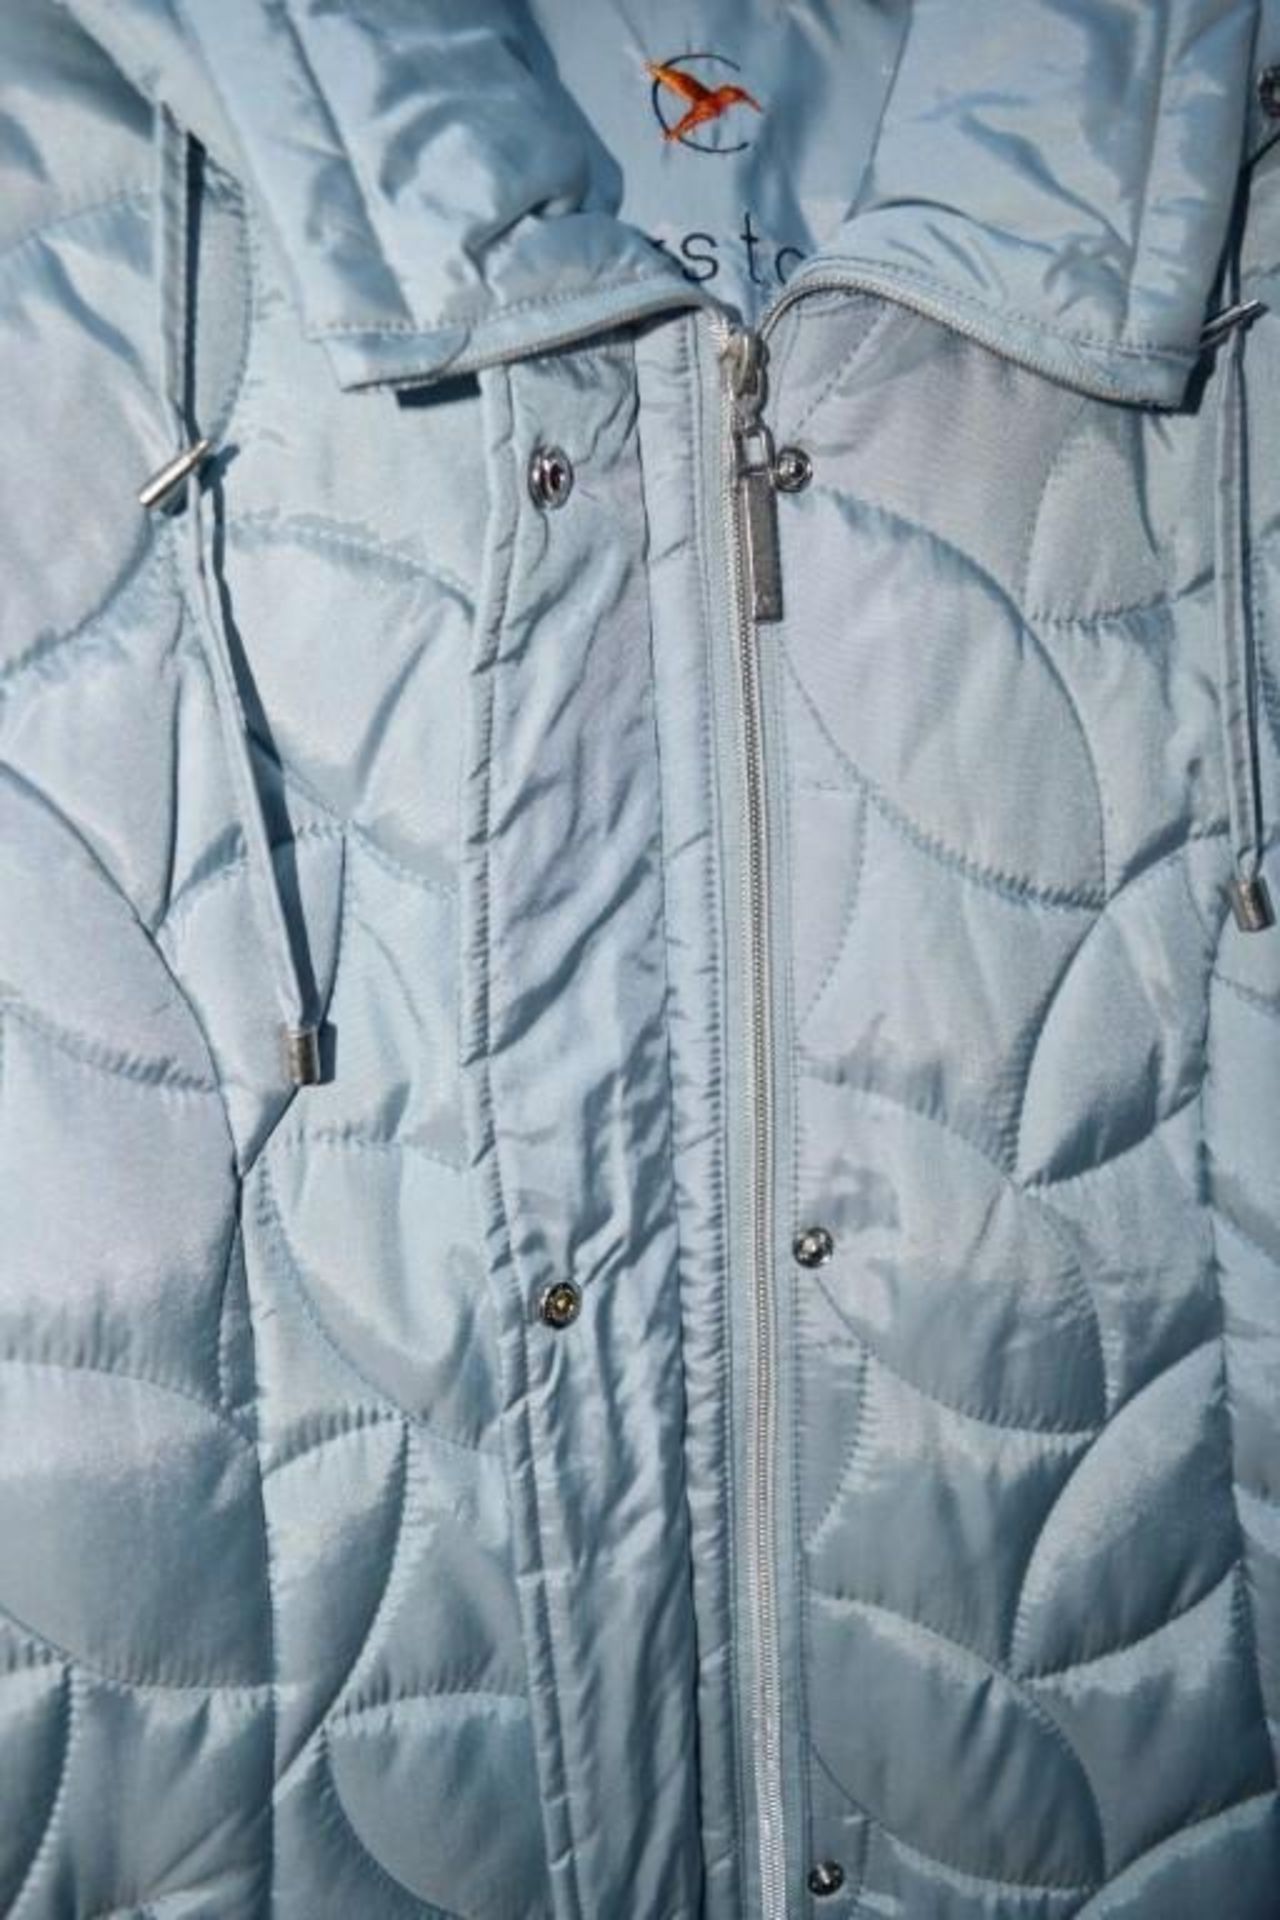 1 x Steilmann Kirsten Womens Quilted Winter Coat - Features Removable Hood - Size 12 - Colour: Pale - Image 2 of 5